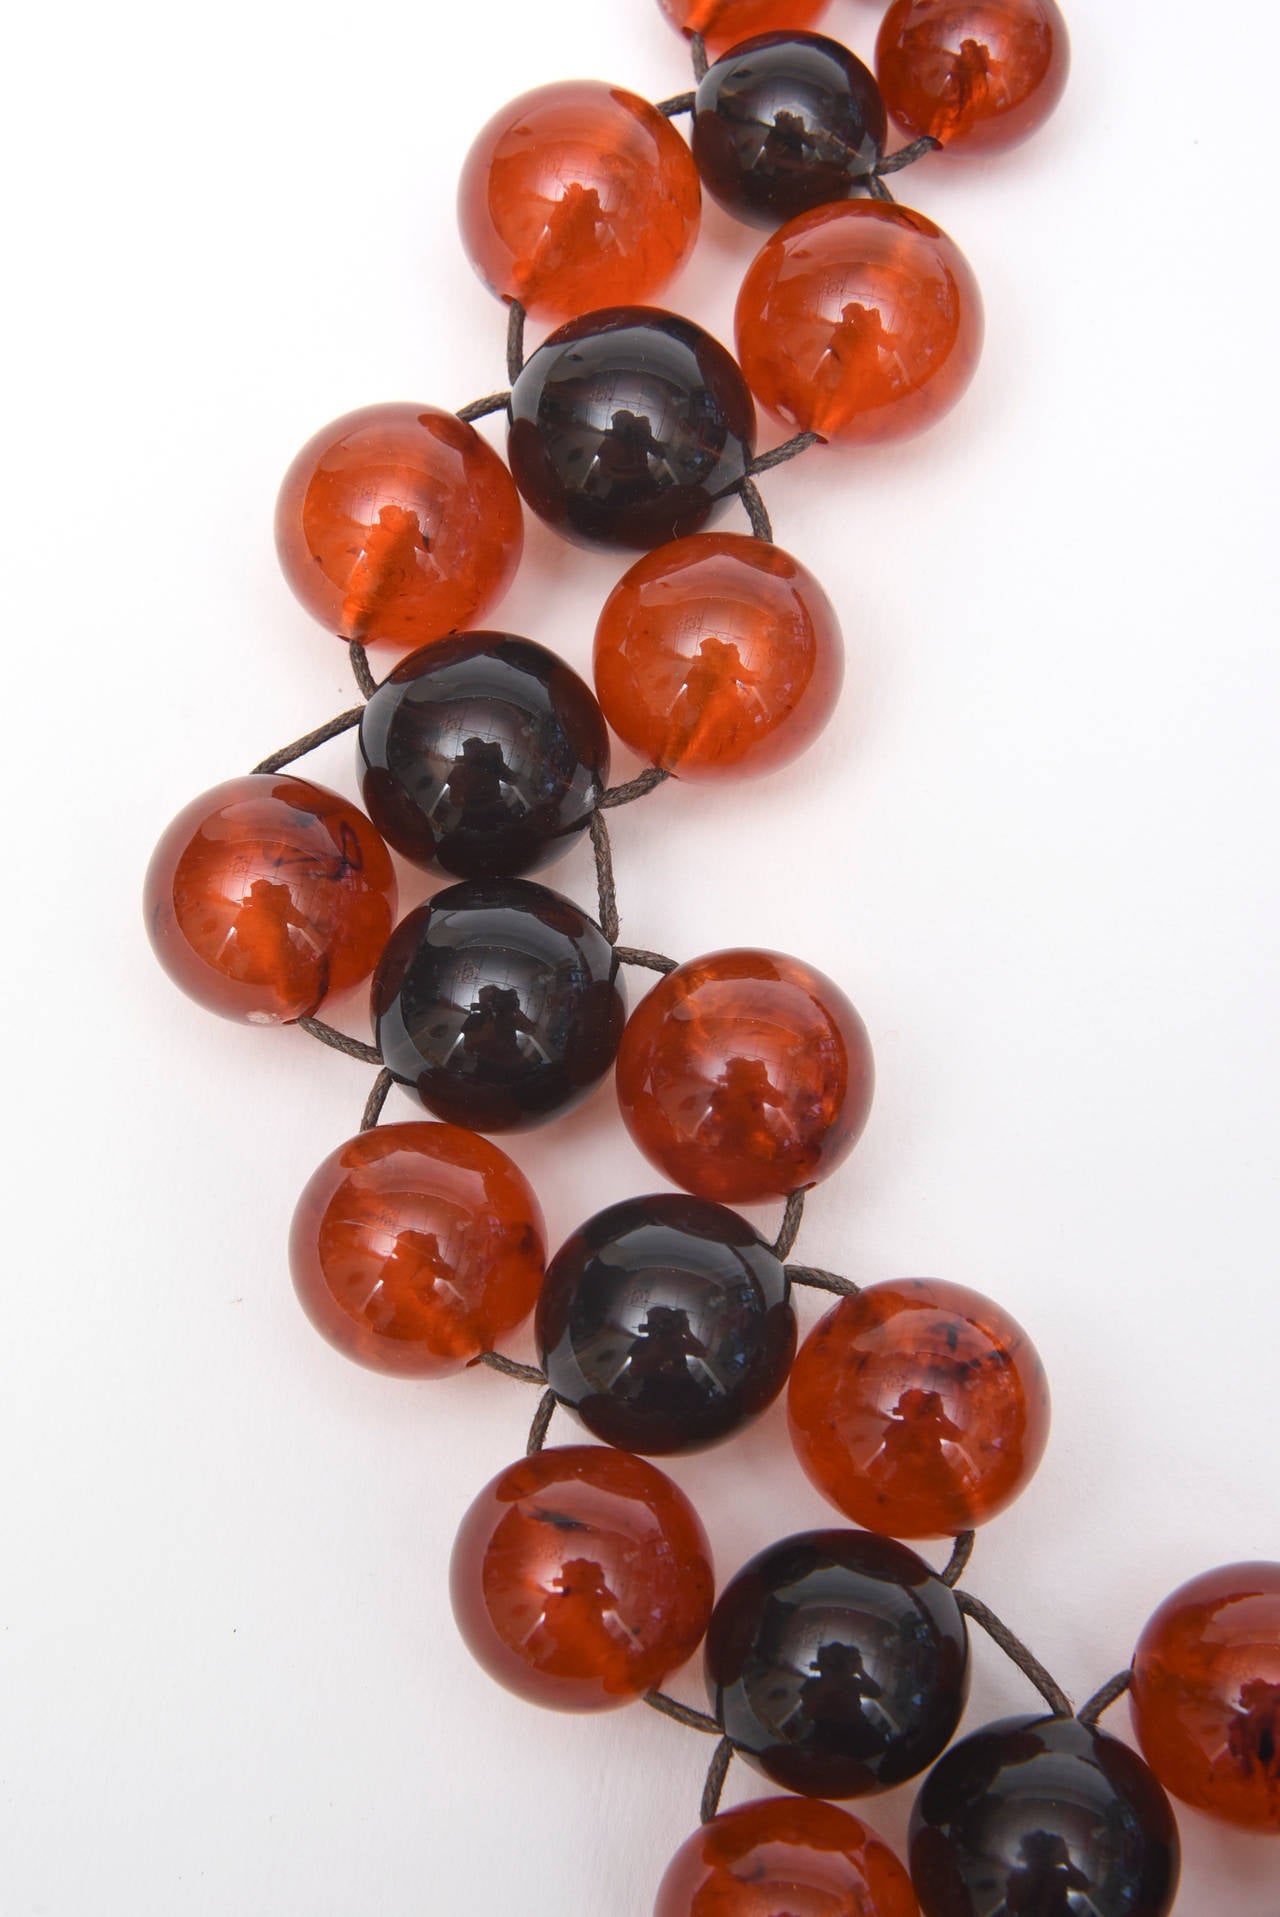 Orange-Amber and black purple resin balls make this fun vintage necklace eye catching.  It is on a wire and connected to 3 staggered rows. The colors are perfect for all seasons Au Courant! We are now offering 25% off on sale now should you wish to